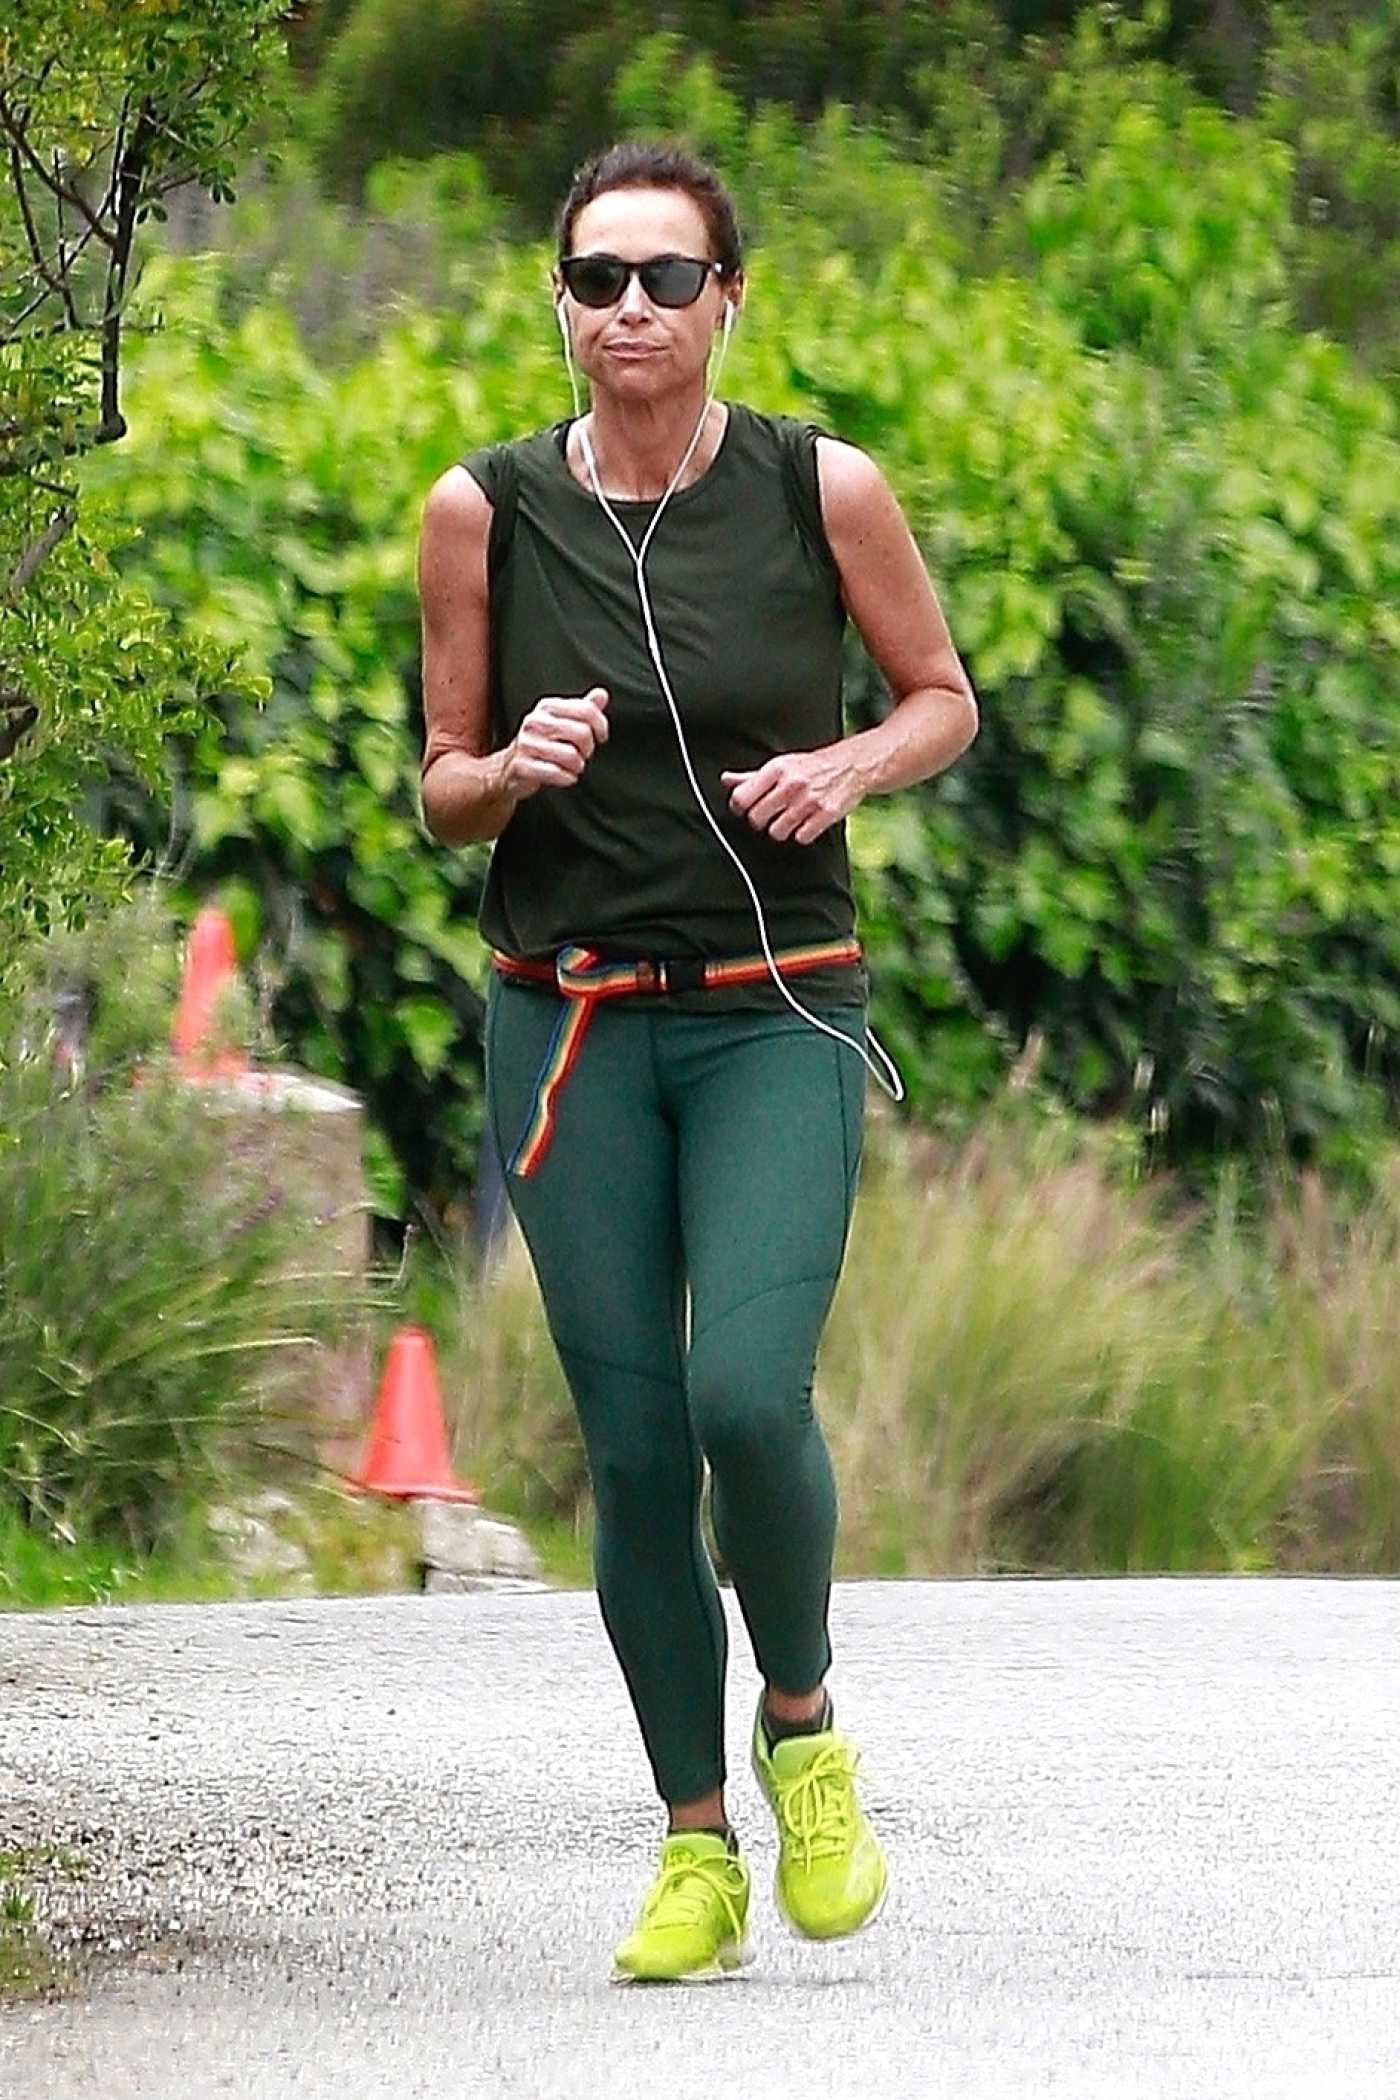 Minnie Driver in a Green Leggings Goes for a Run During the COVID-19 Lockdown in Los Angeles 04/20/2020